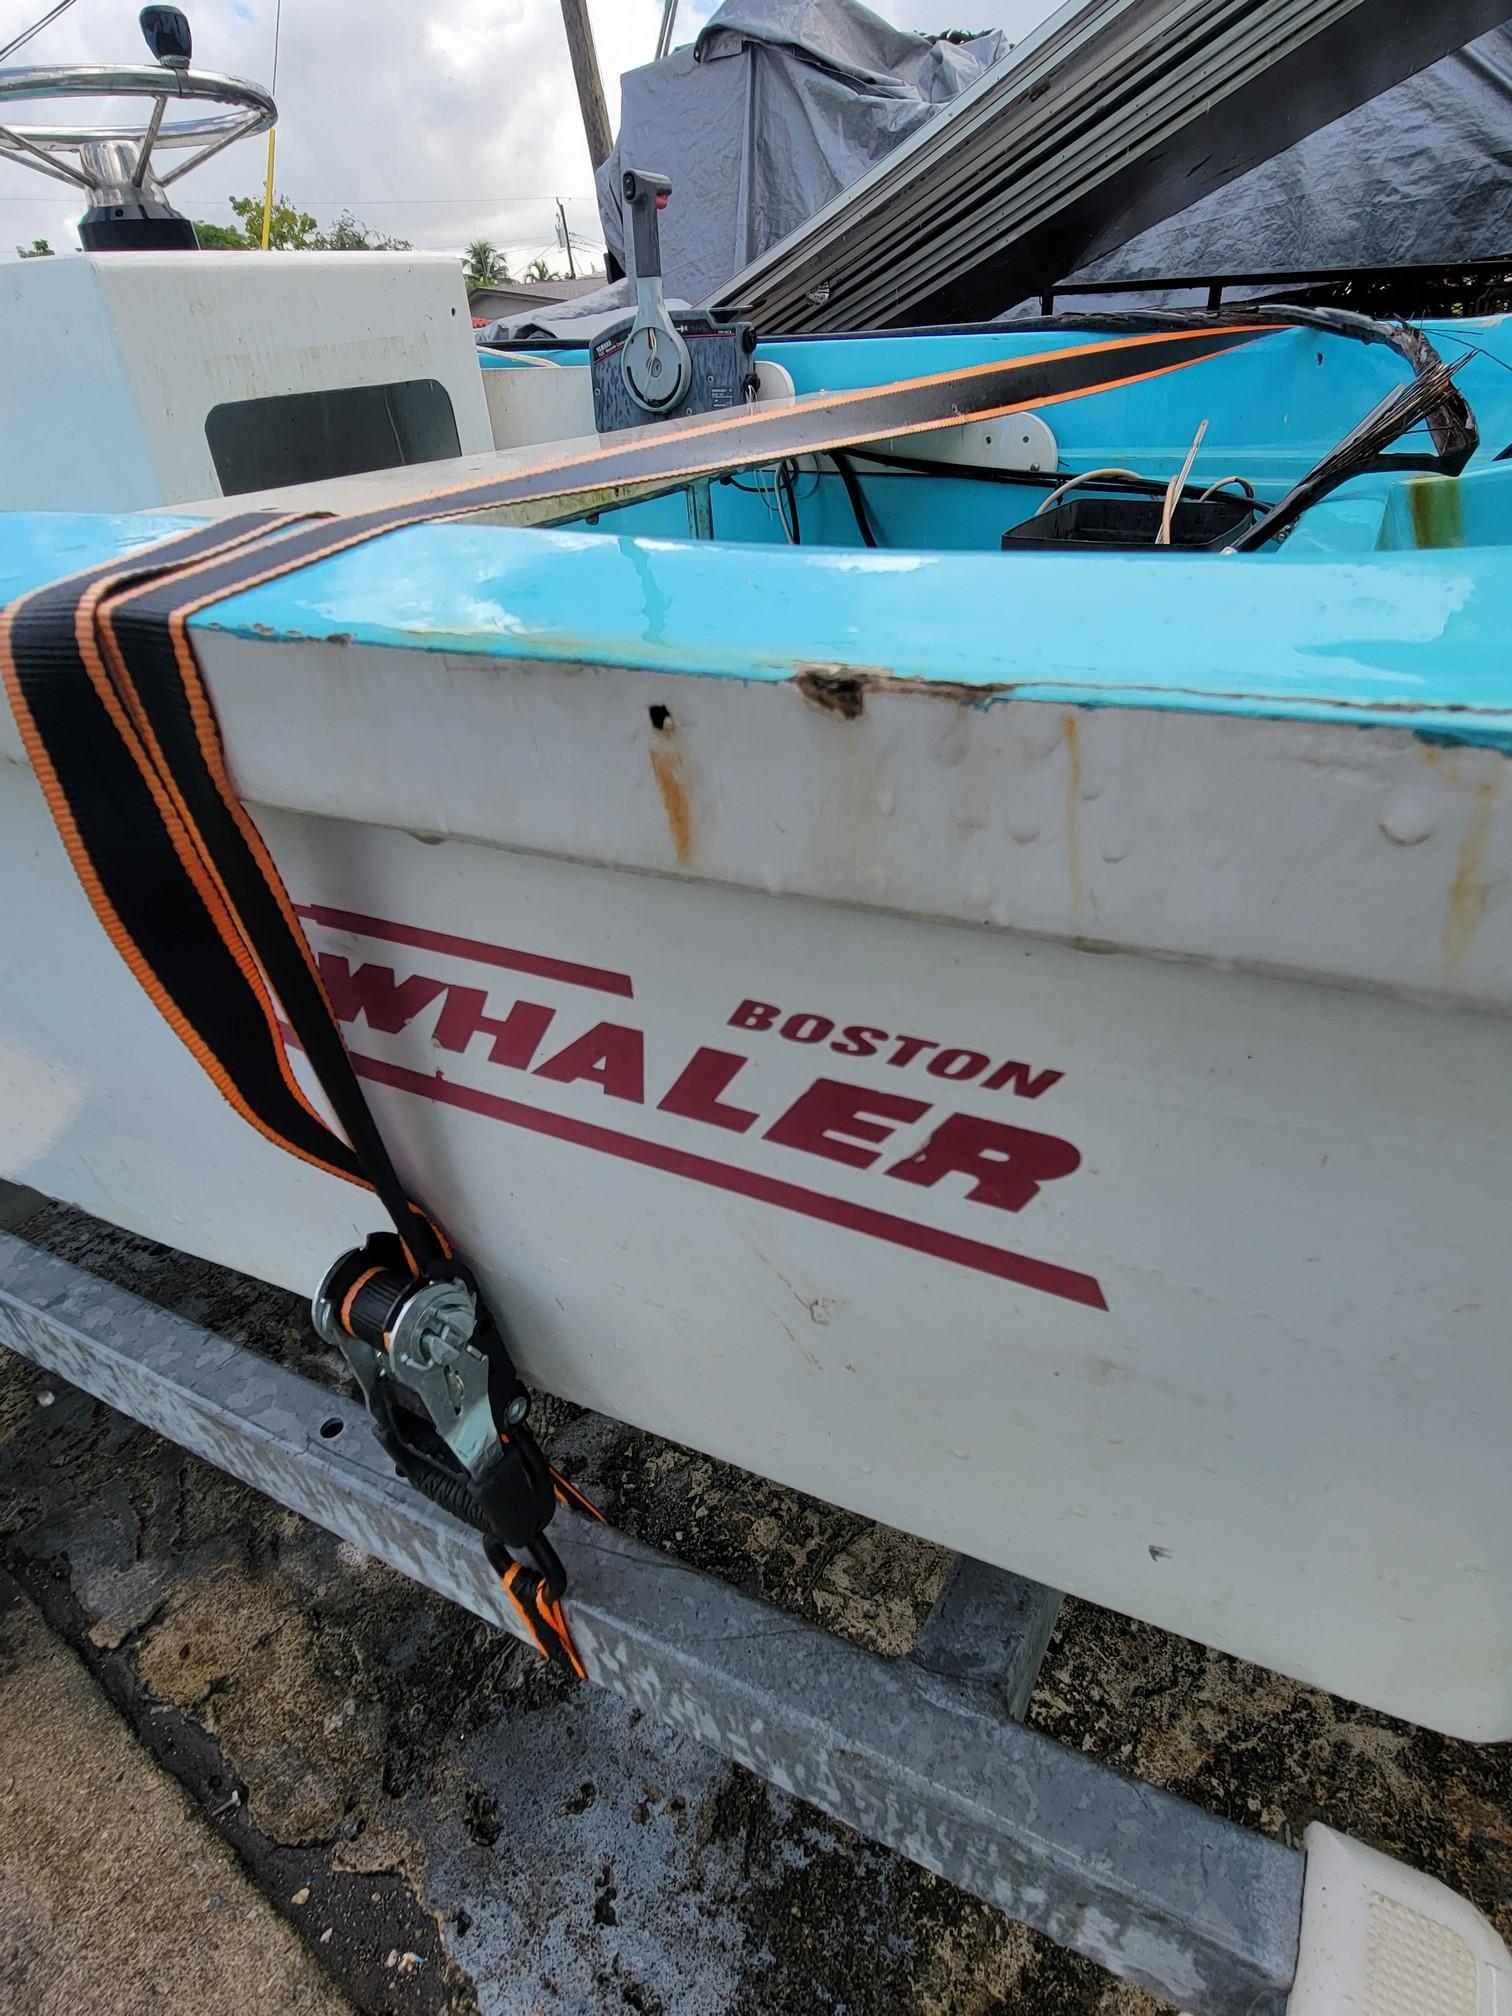 13' Boston Whaler with Yamaha Outboard Motor Trailer